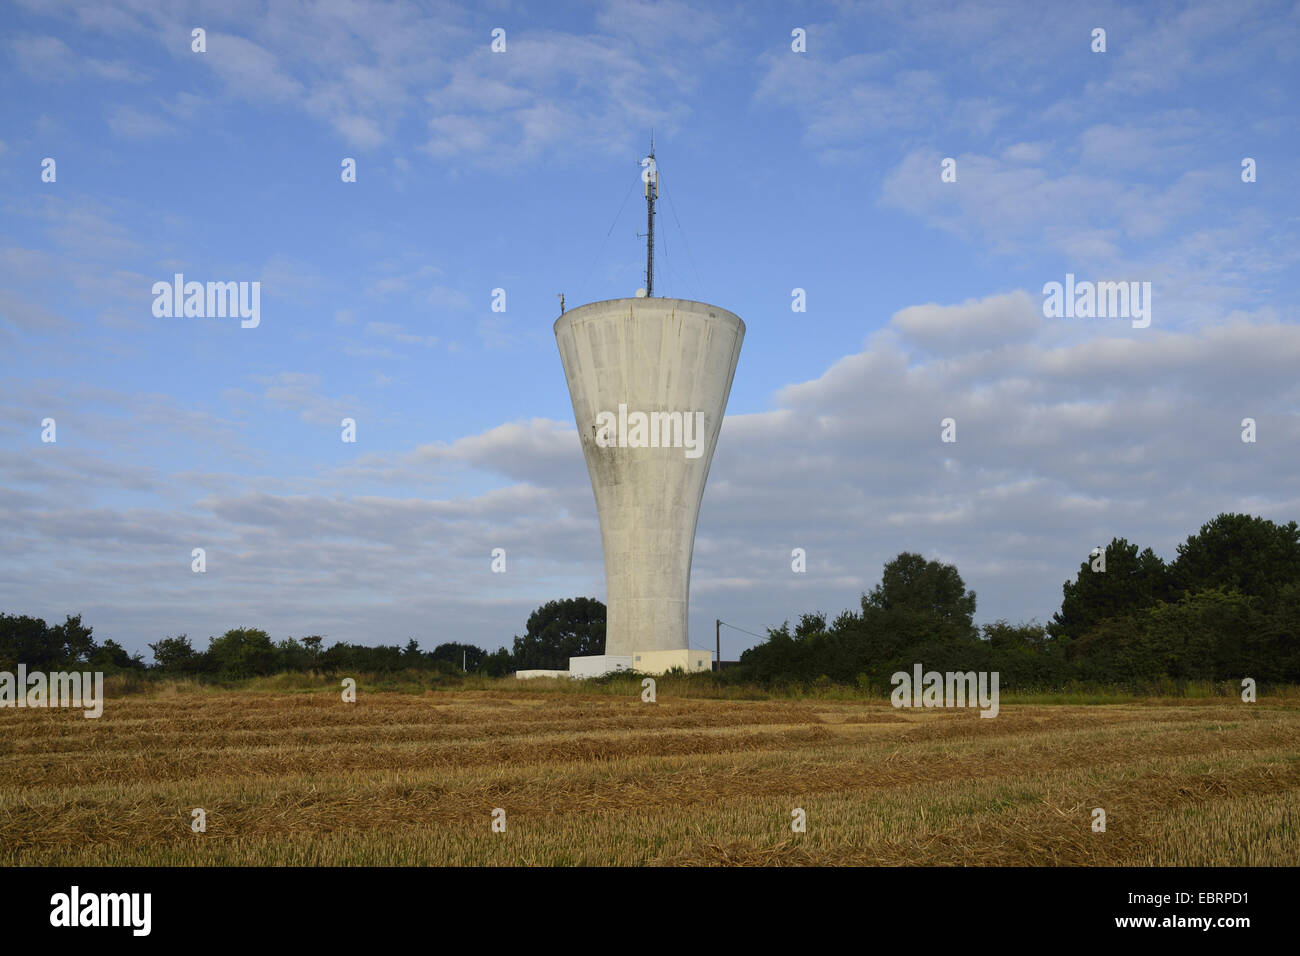 water tower with mast, France, Brittany, Erquy Stock Photo